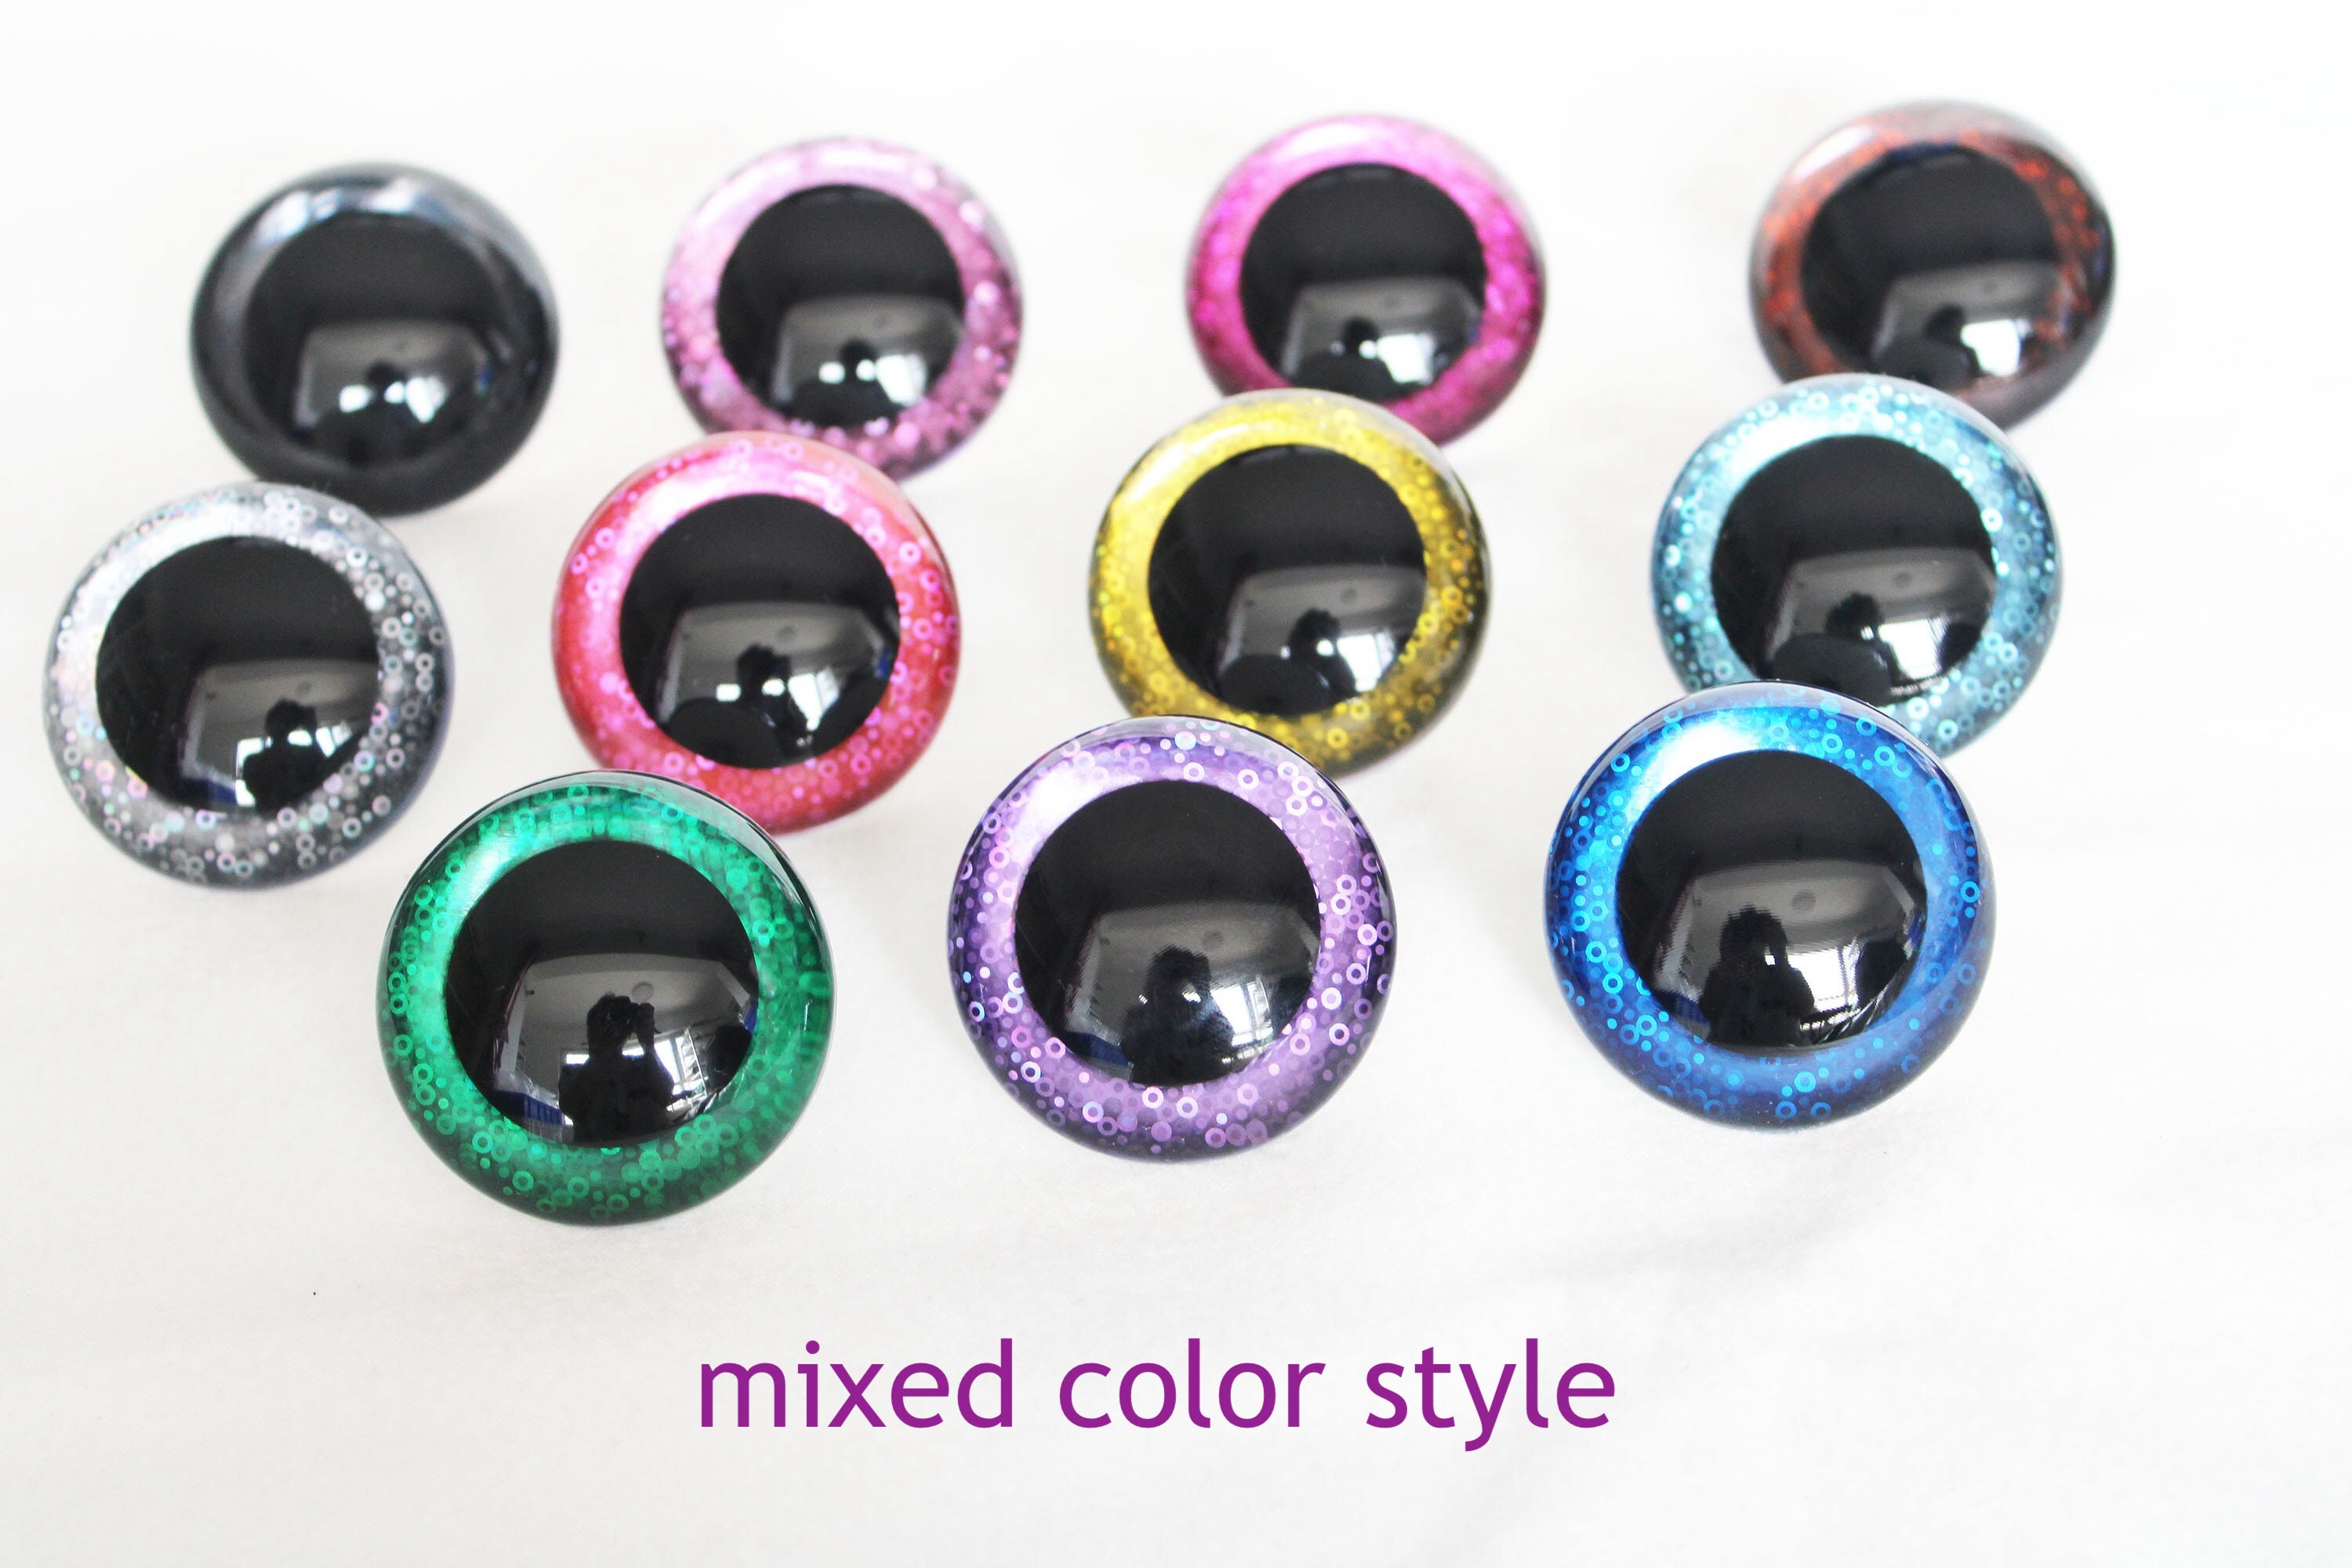 KOOSUFA 12 Pcs 6 Color Glitter Safety Eyes 9mm 12mm 14mm 16mm 18mm 20mm 25mm Premium Round Amigurumi Eyes with Washers for Doll Teddy Bear Puppet